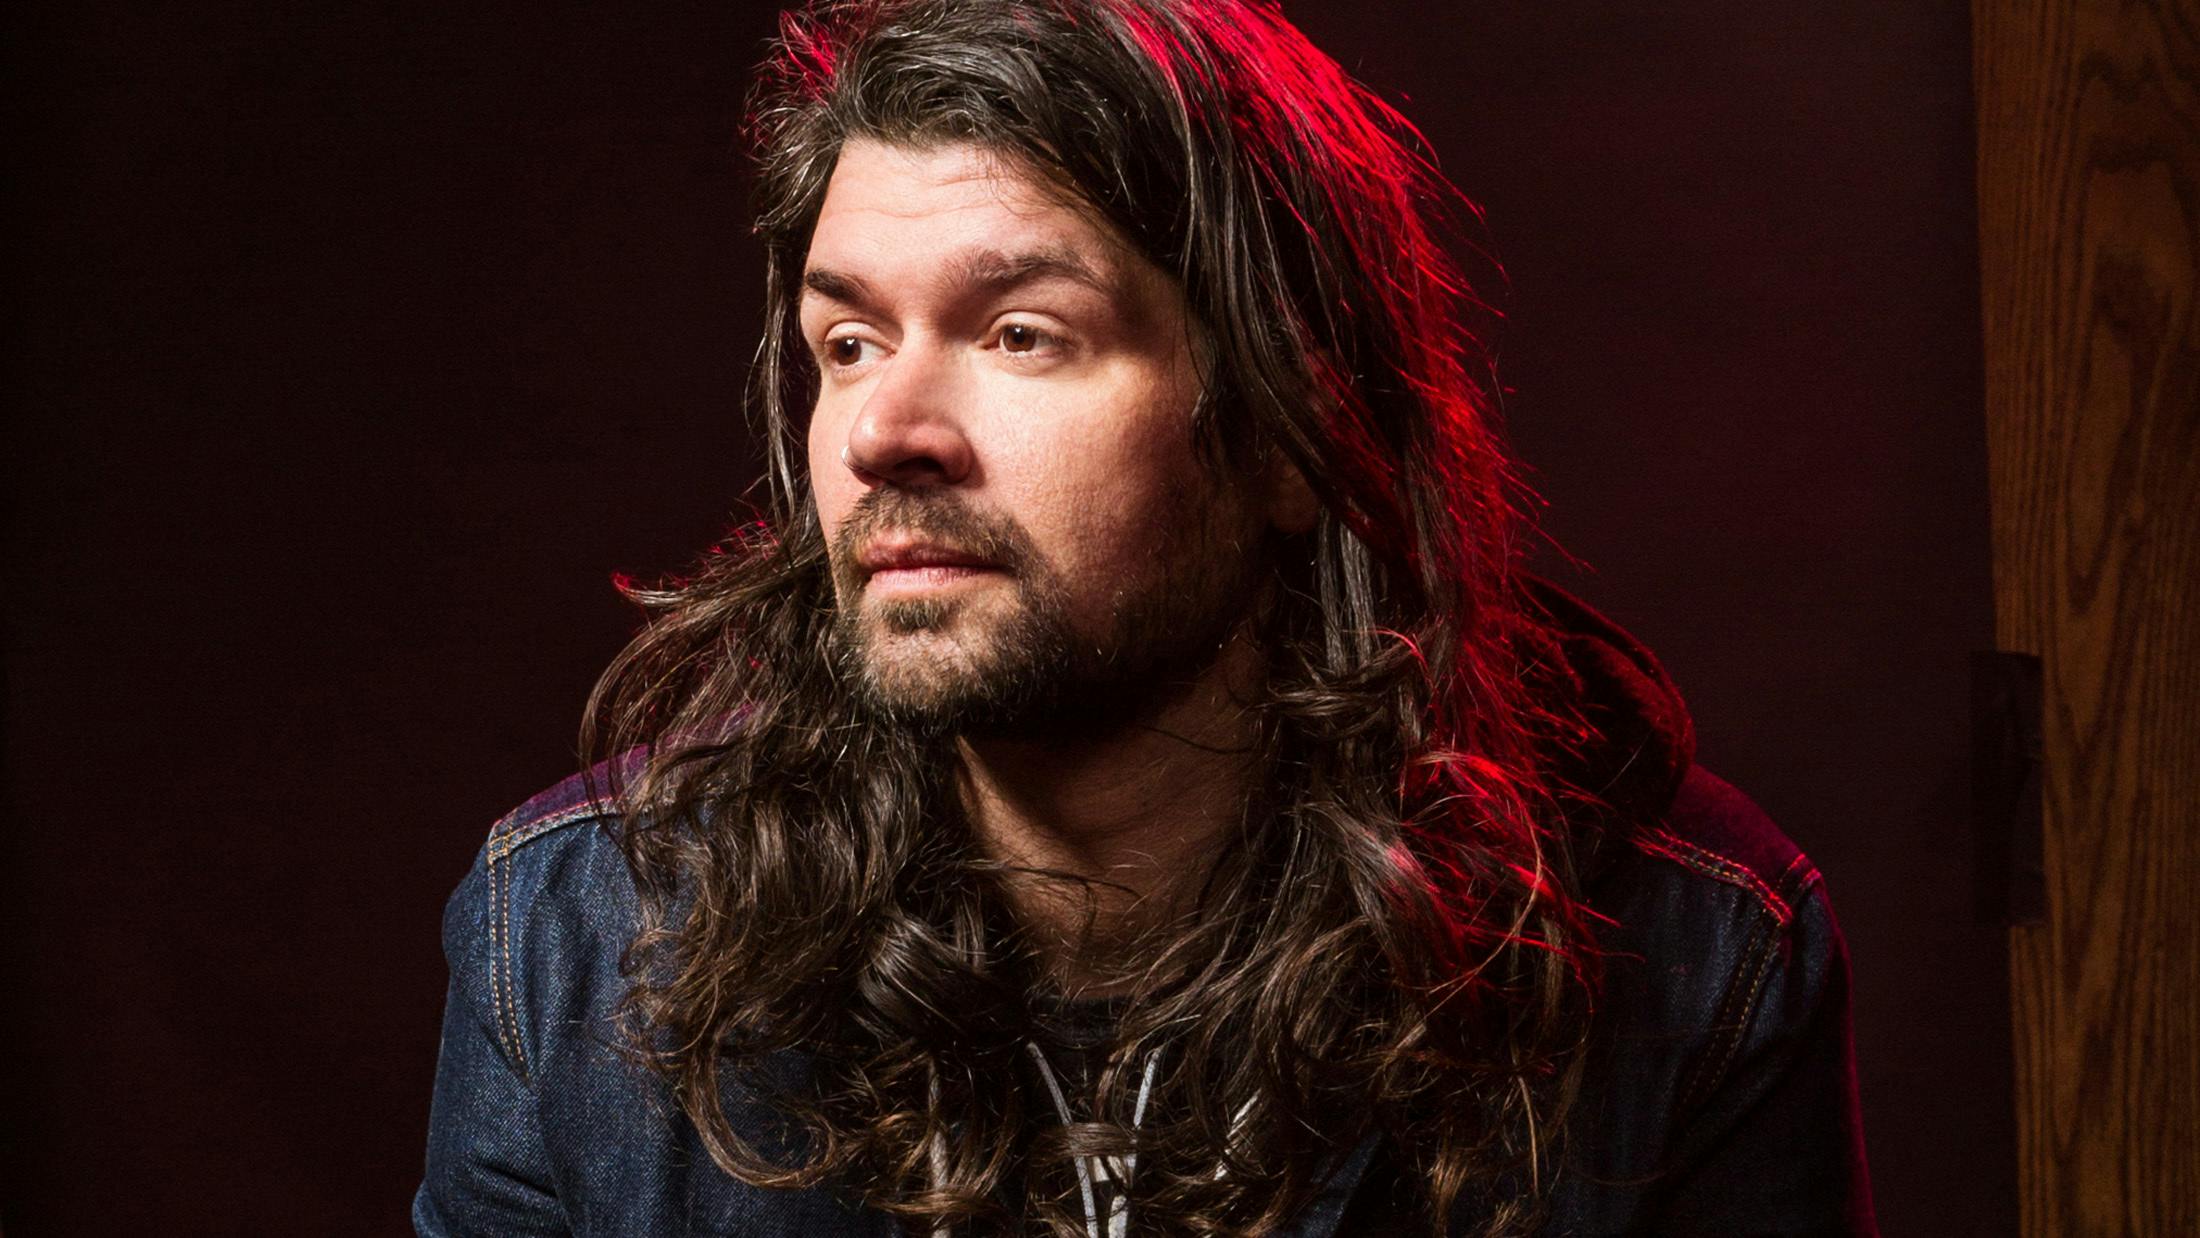 Adam Lazzara: "Sometimes you don't want to remember the person you used to be... but it helps to make peace with yourself"